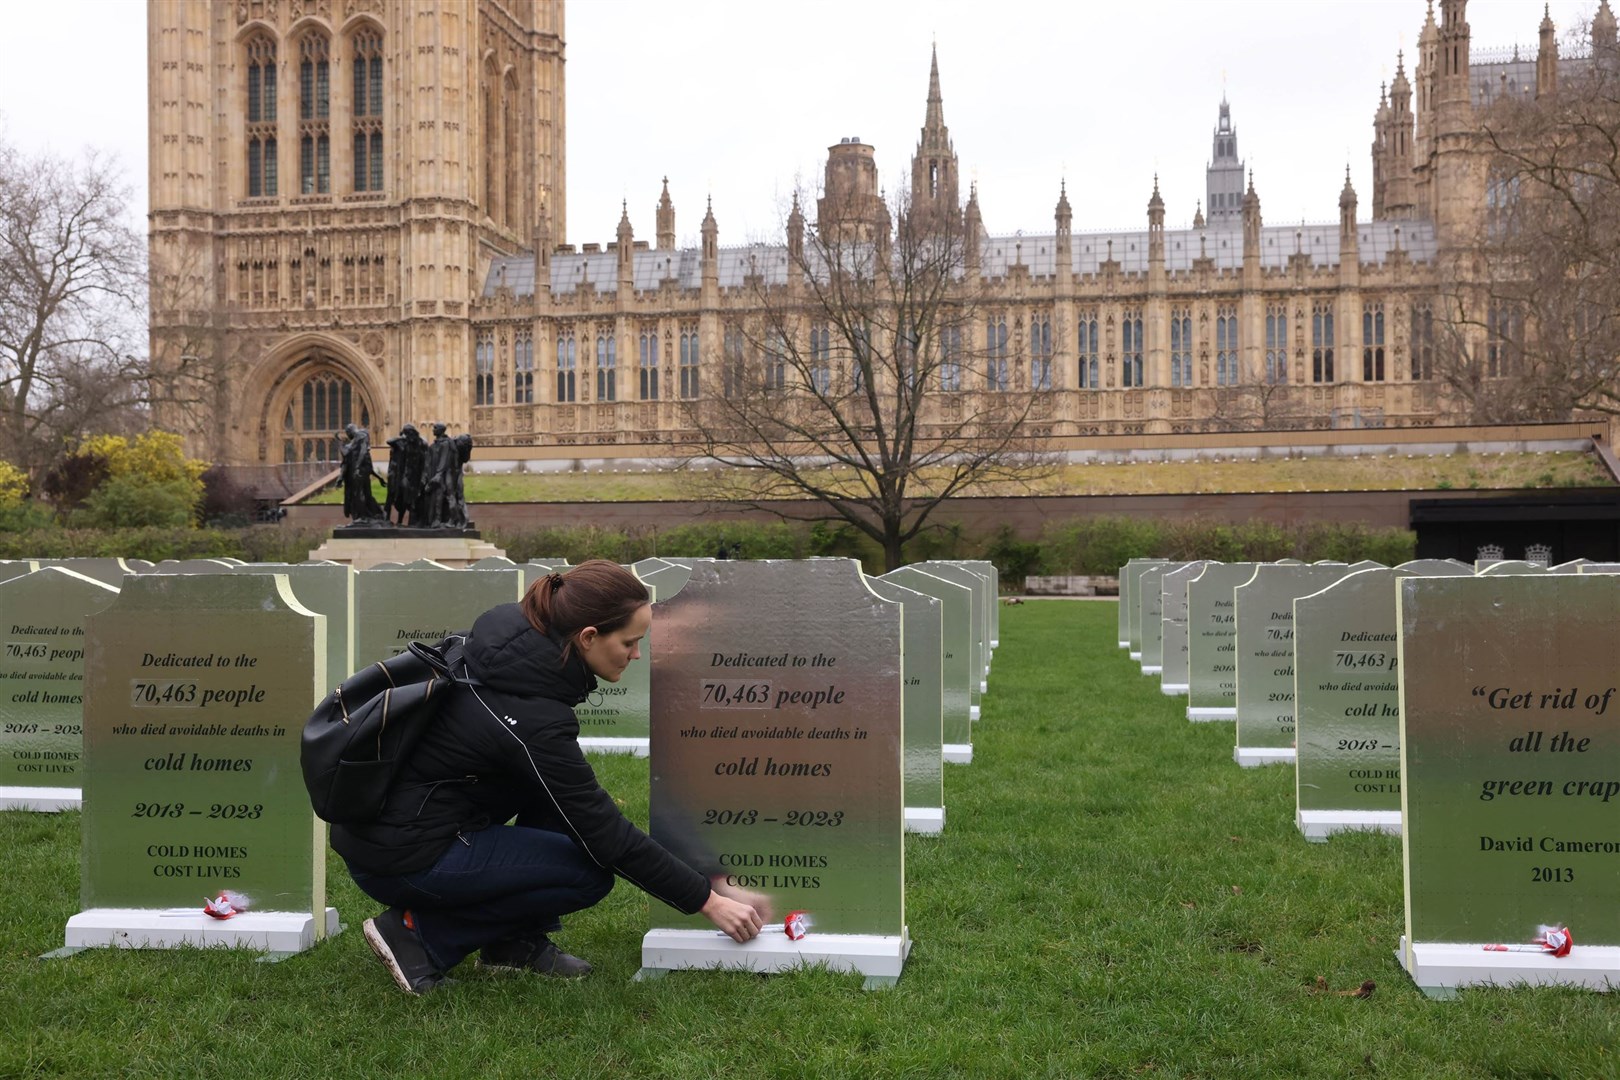 A Greenpeace activist lays a flower on one of the ‘headstones’ outside the Palace of Westminster (Alex McBride/Greenpeace/PA)